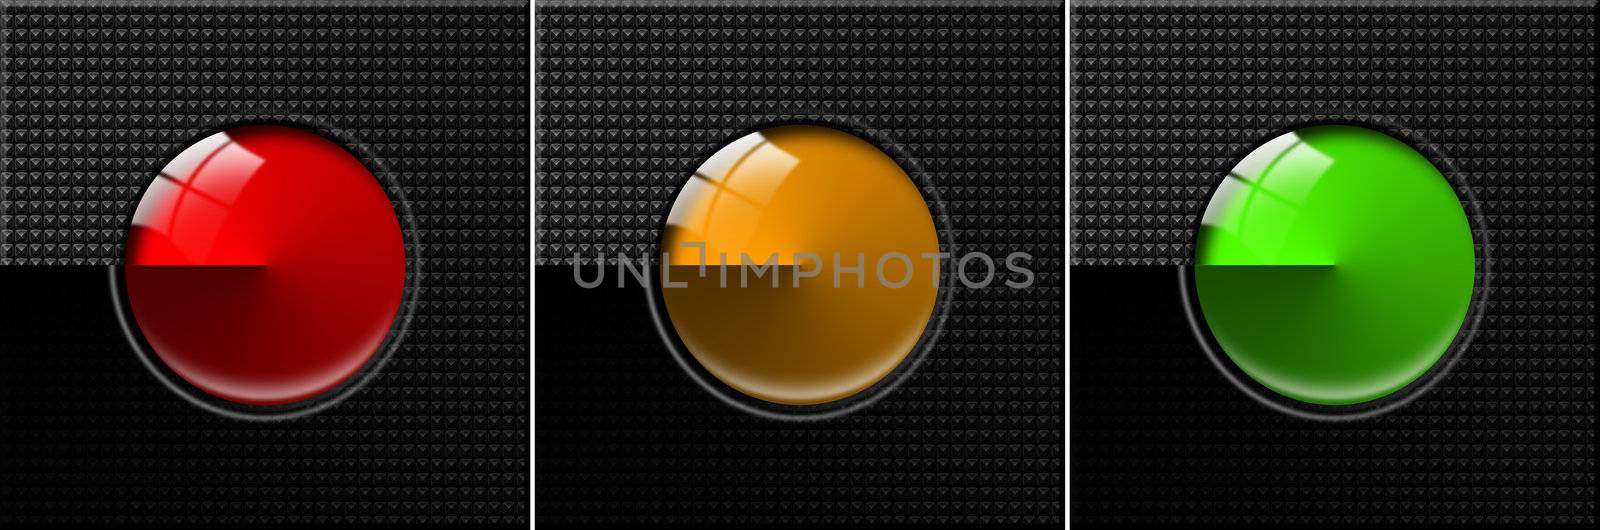 Black Abstract background with three colored circles, red, orange and green